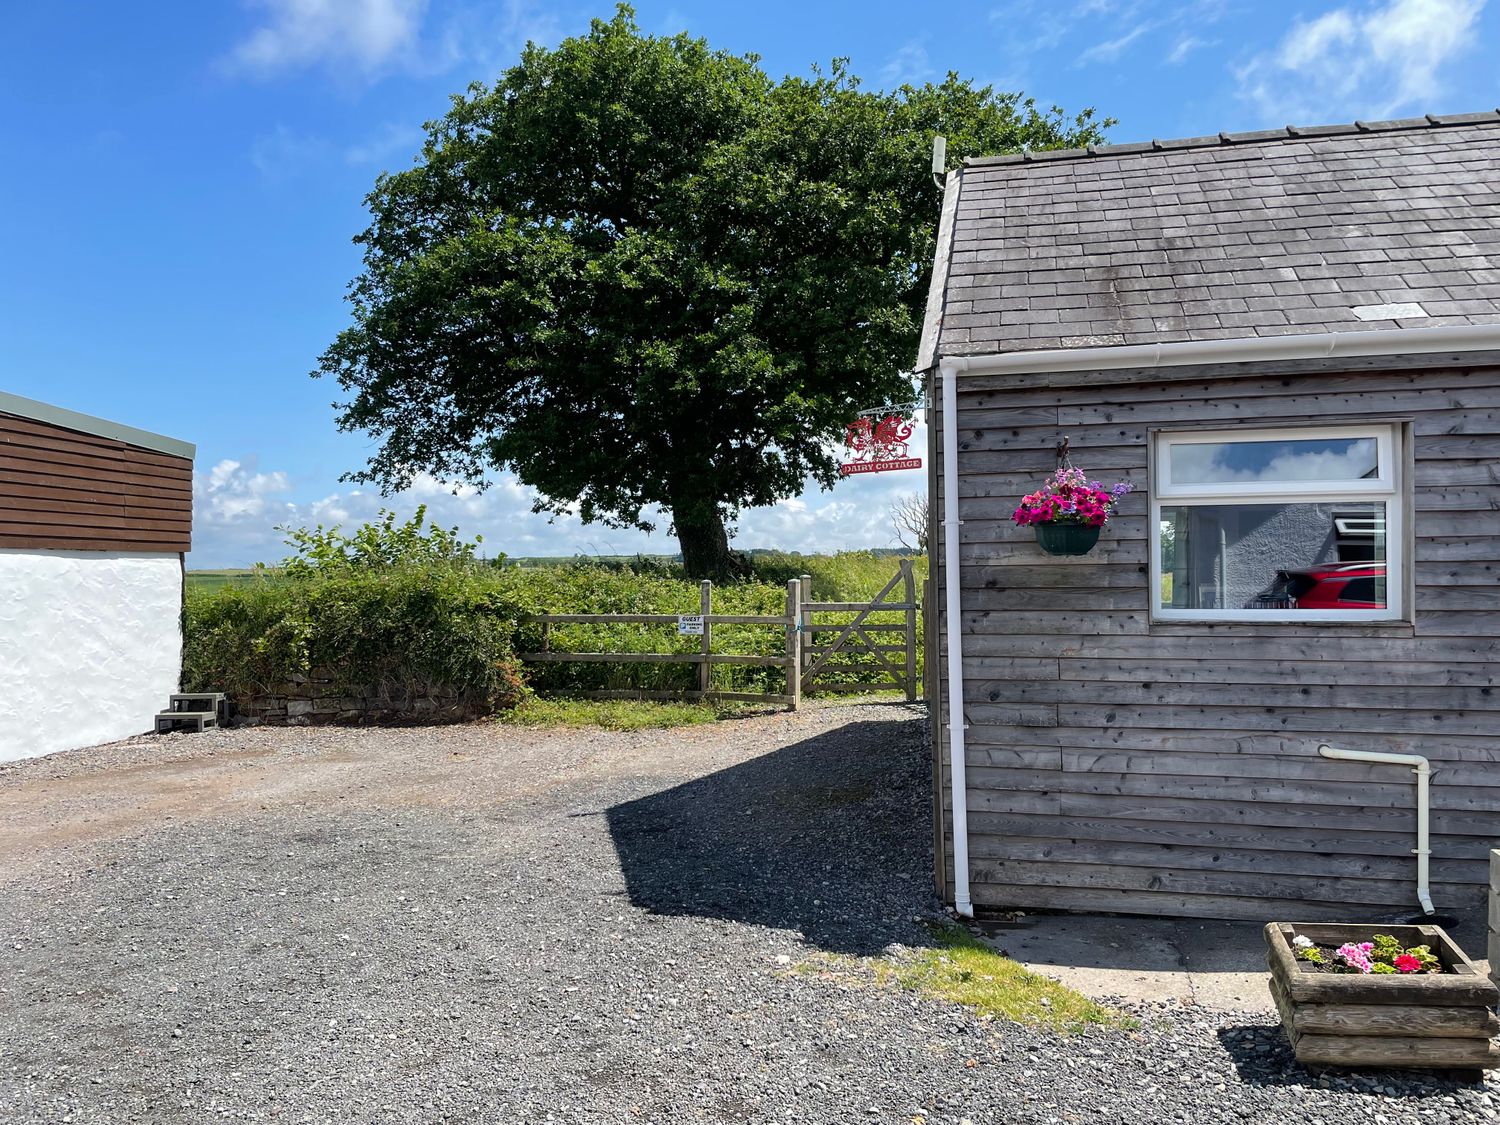 Dairy Cottage in Tavernspite near Whitland, Pembrokeshire, hot tub, dog-friendly, off-road parking. 